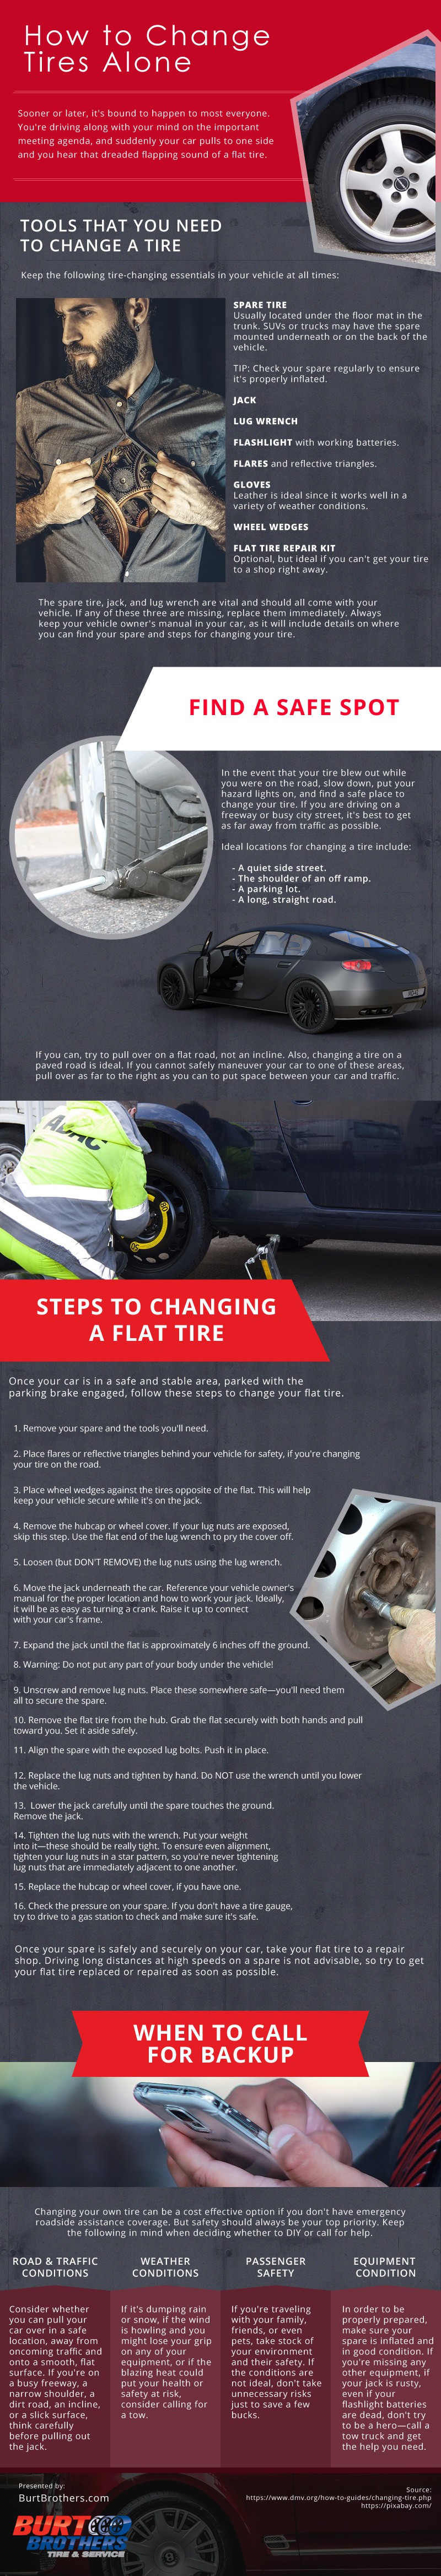 How-to-Change-Tires-Alone Infographic